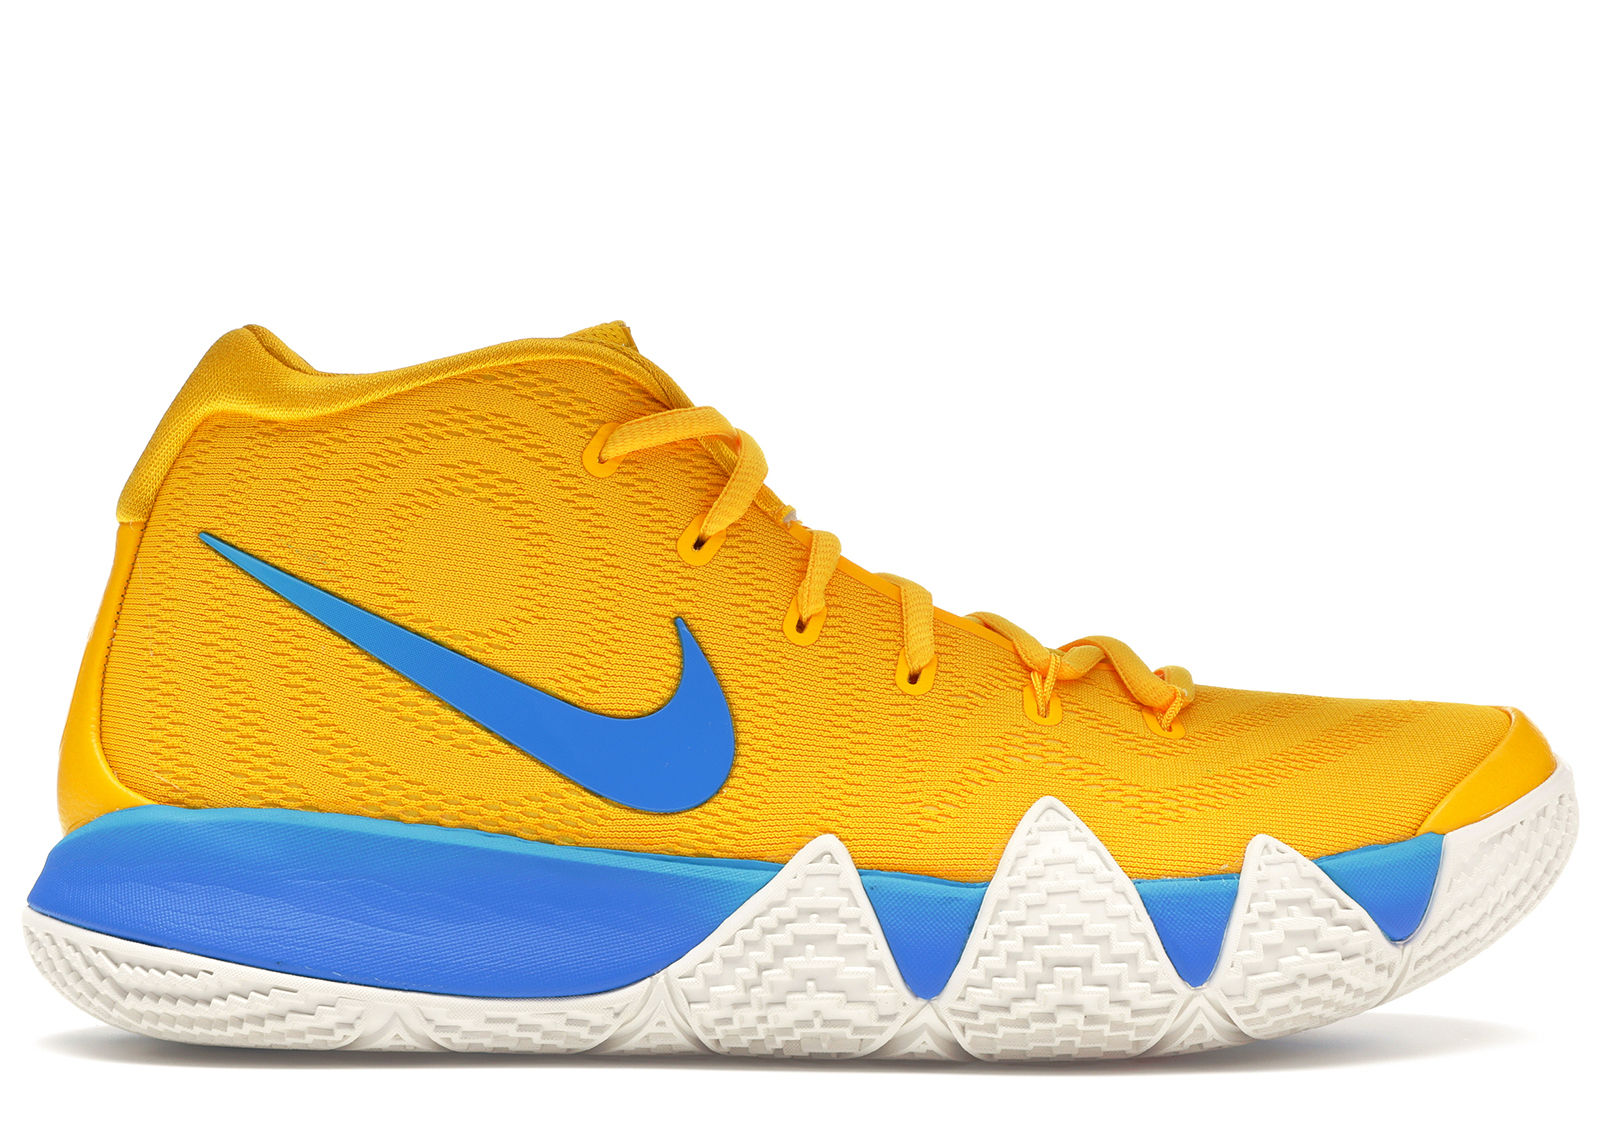 Nike Kyrie 4 Kix (Special Cereal Box Package)